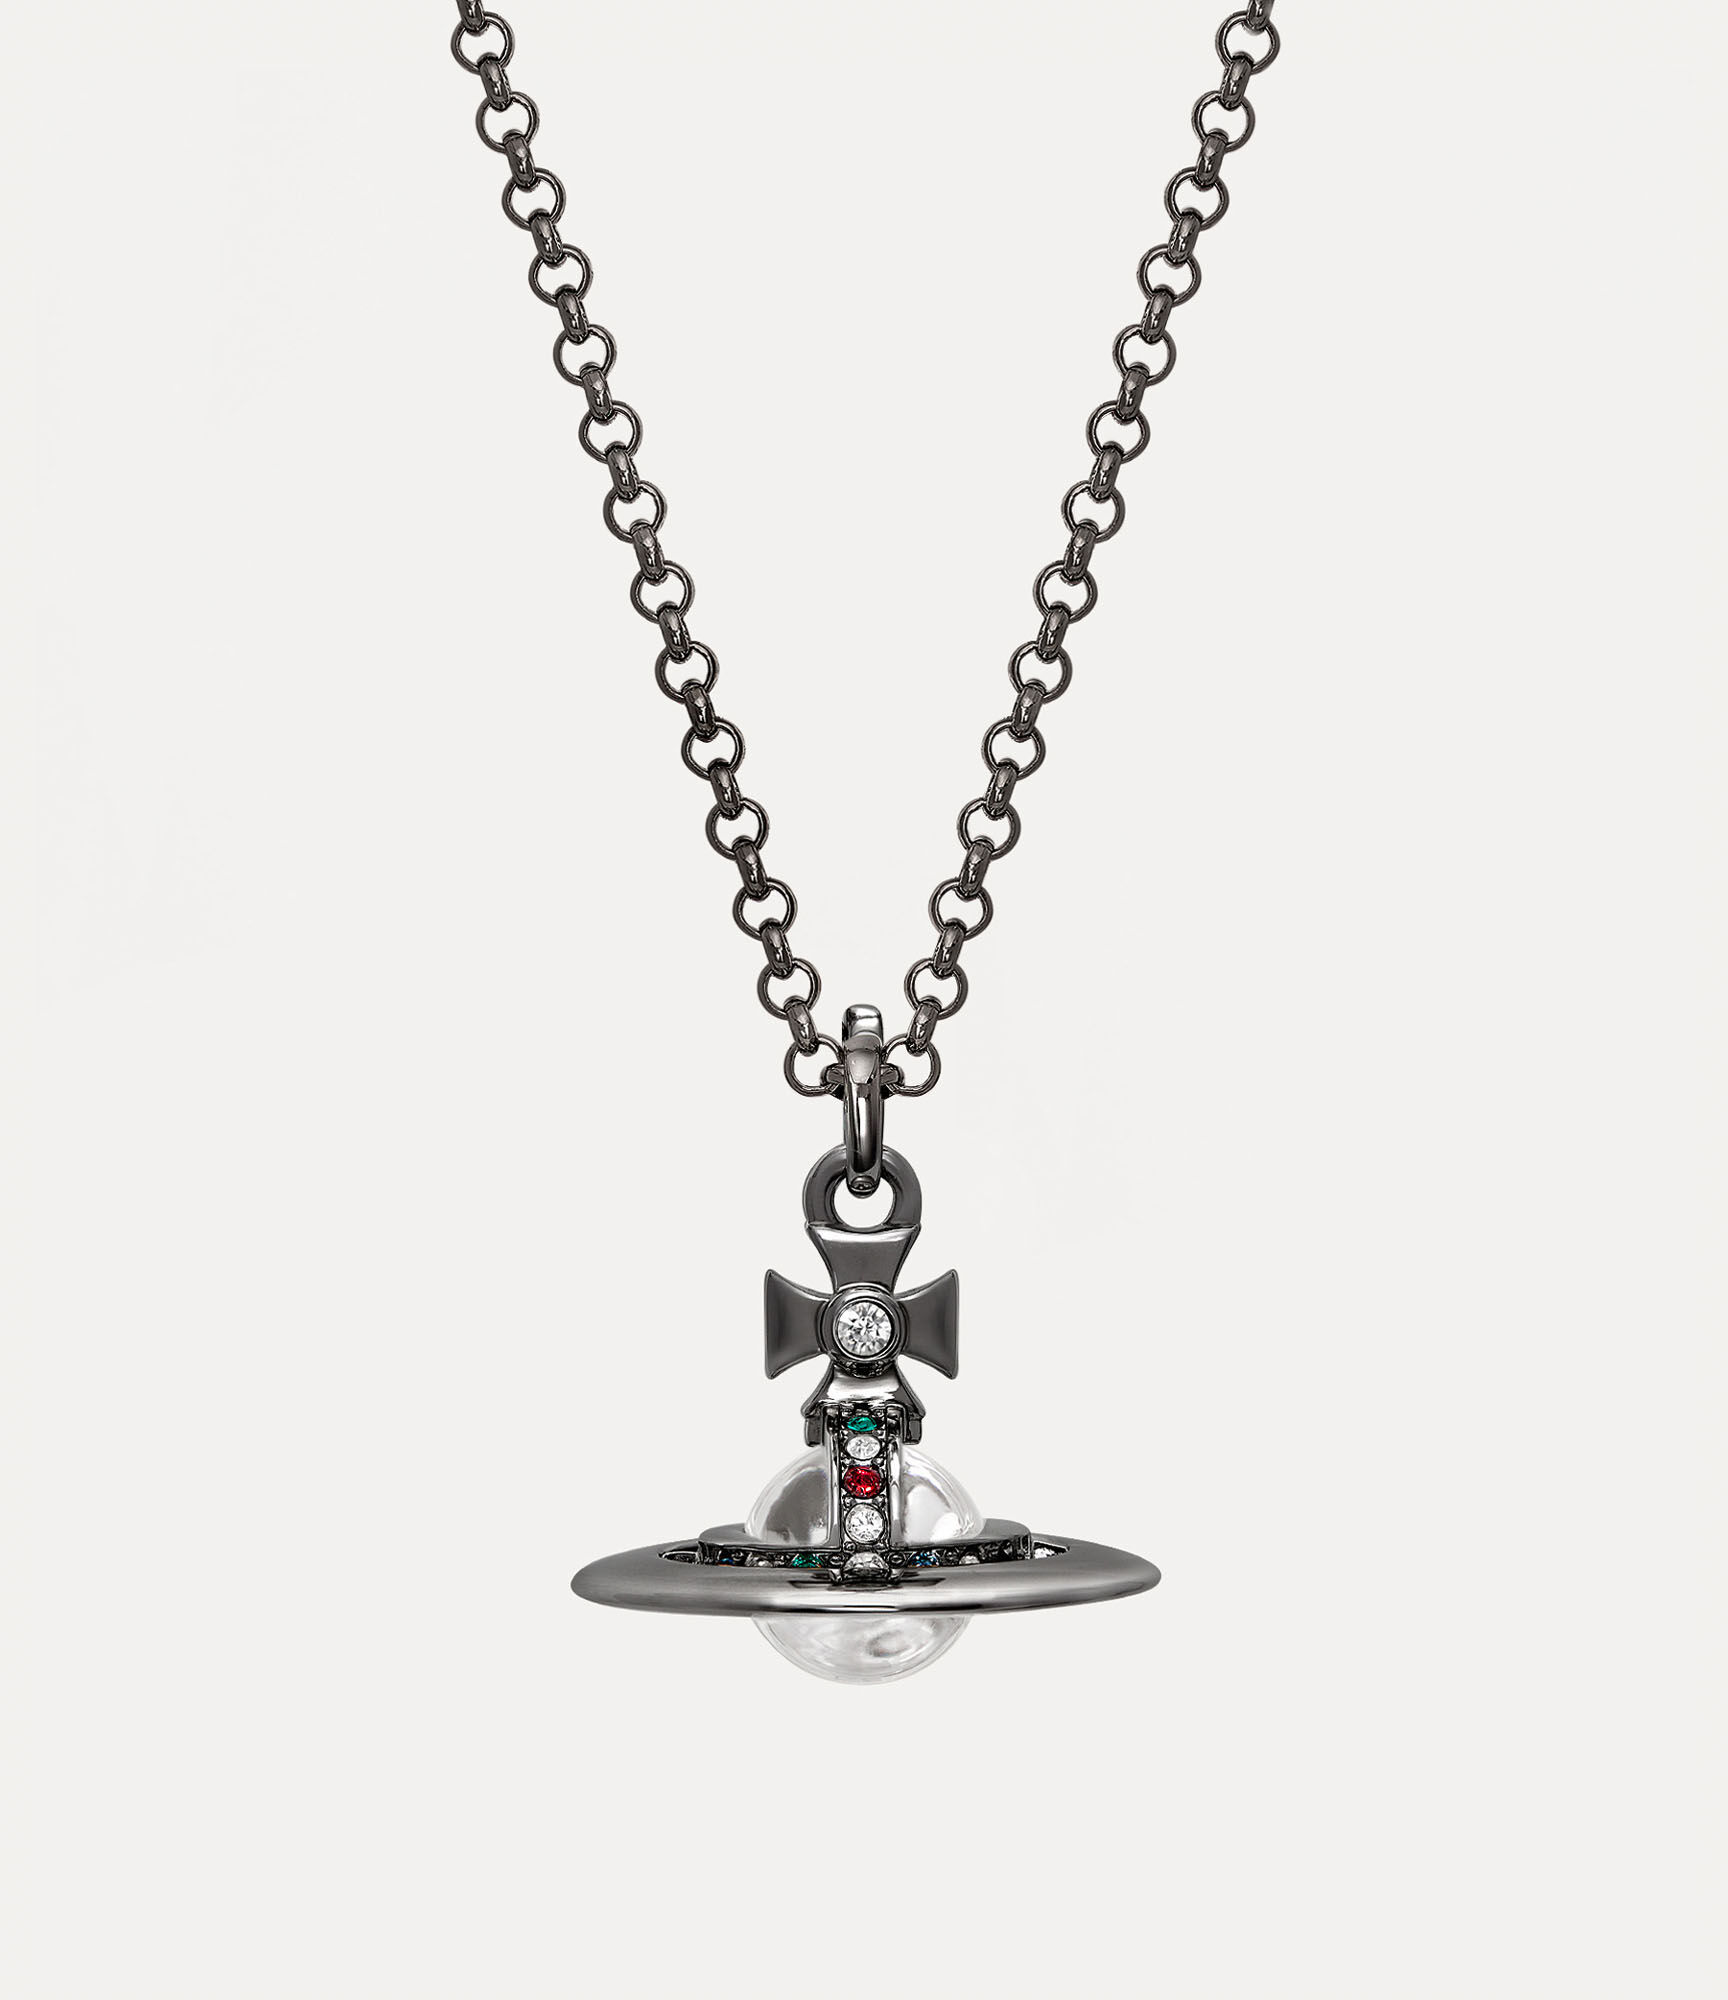 New Tiny Orb Pendant Necklace in Ruthenium | Vivienne Westwood®